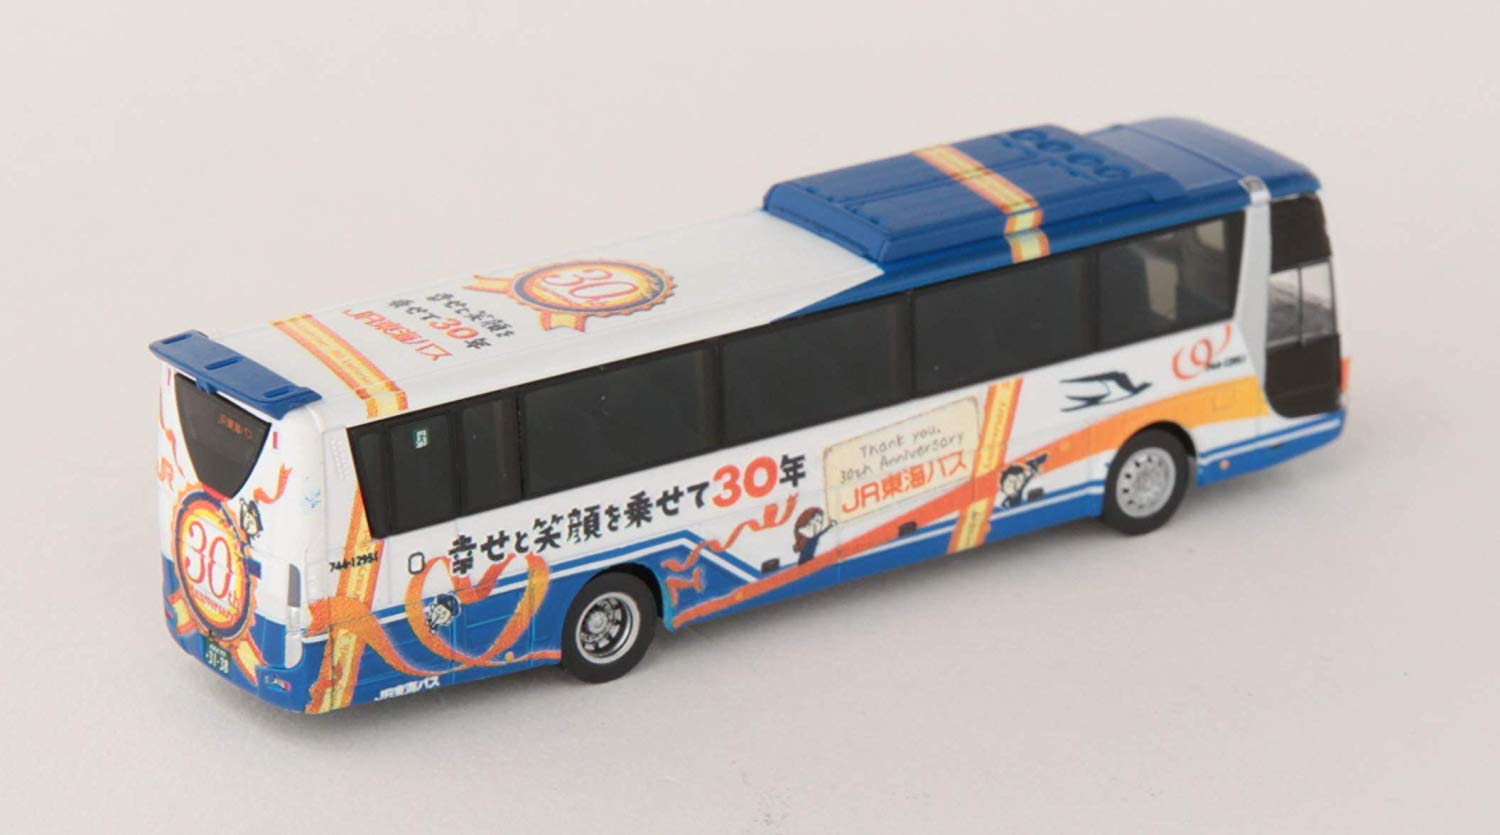 The Bus Collection J.R. Tokai Bus 30th Anniversary Part.2